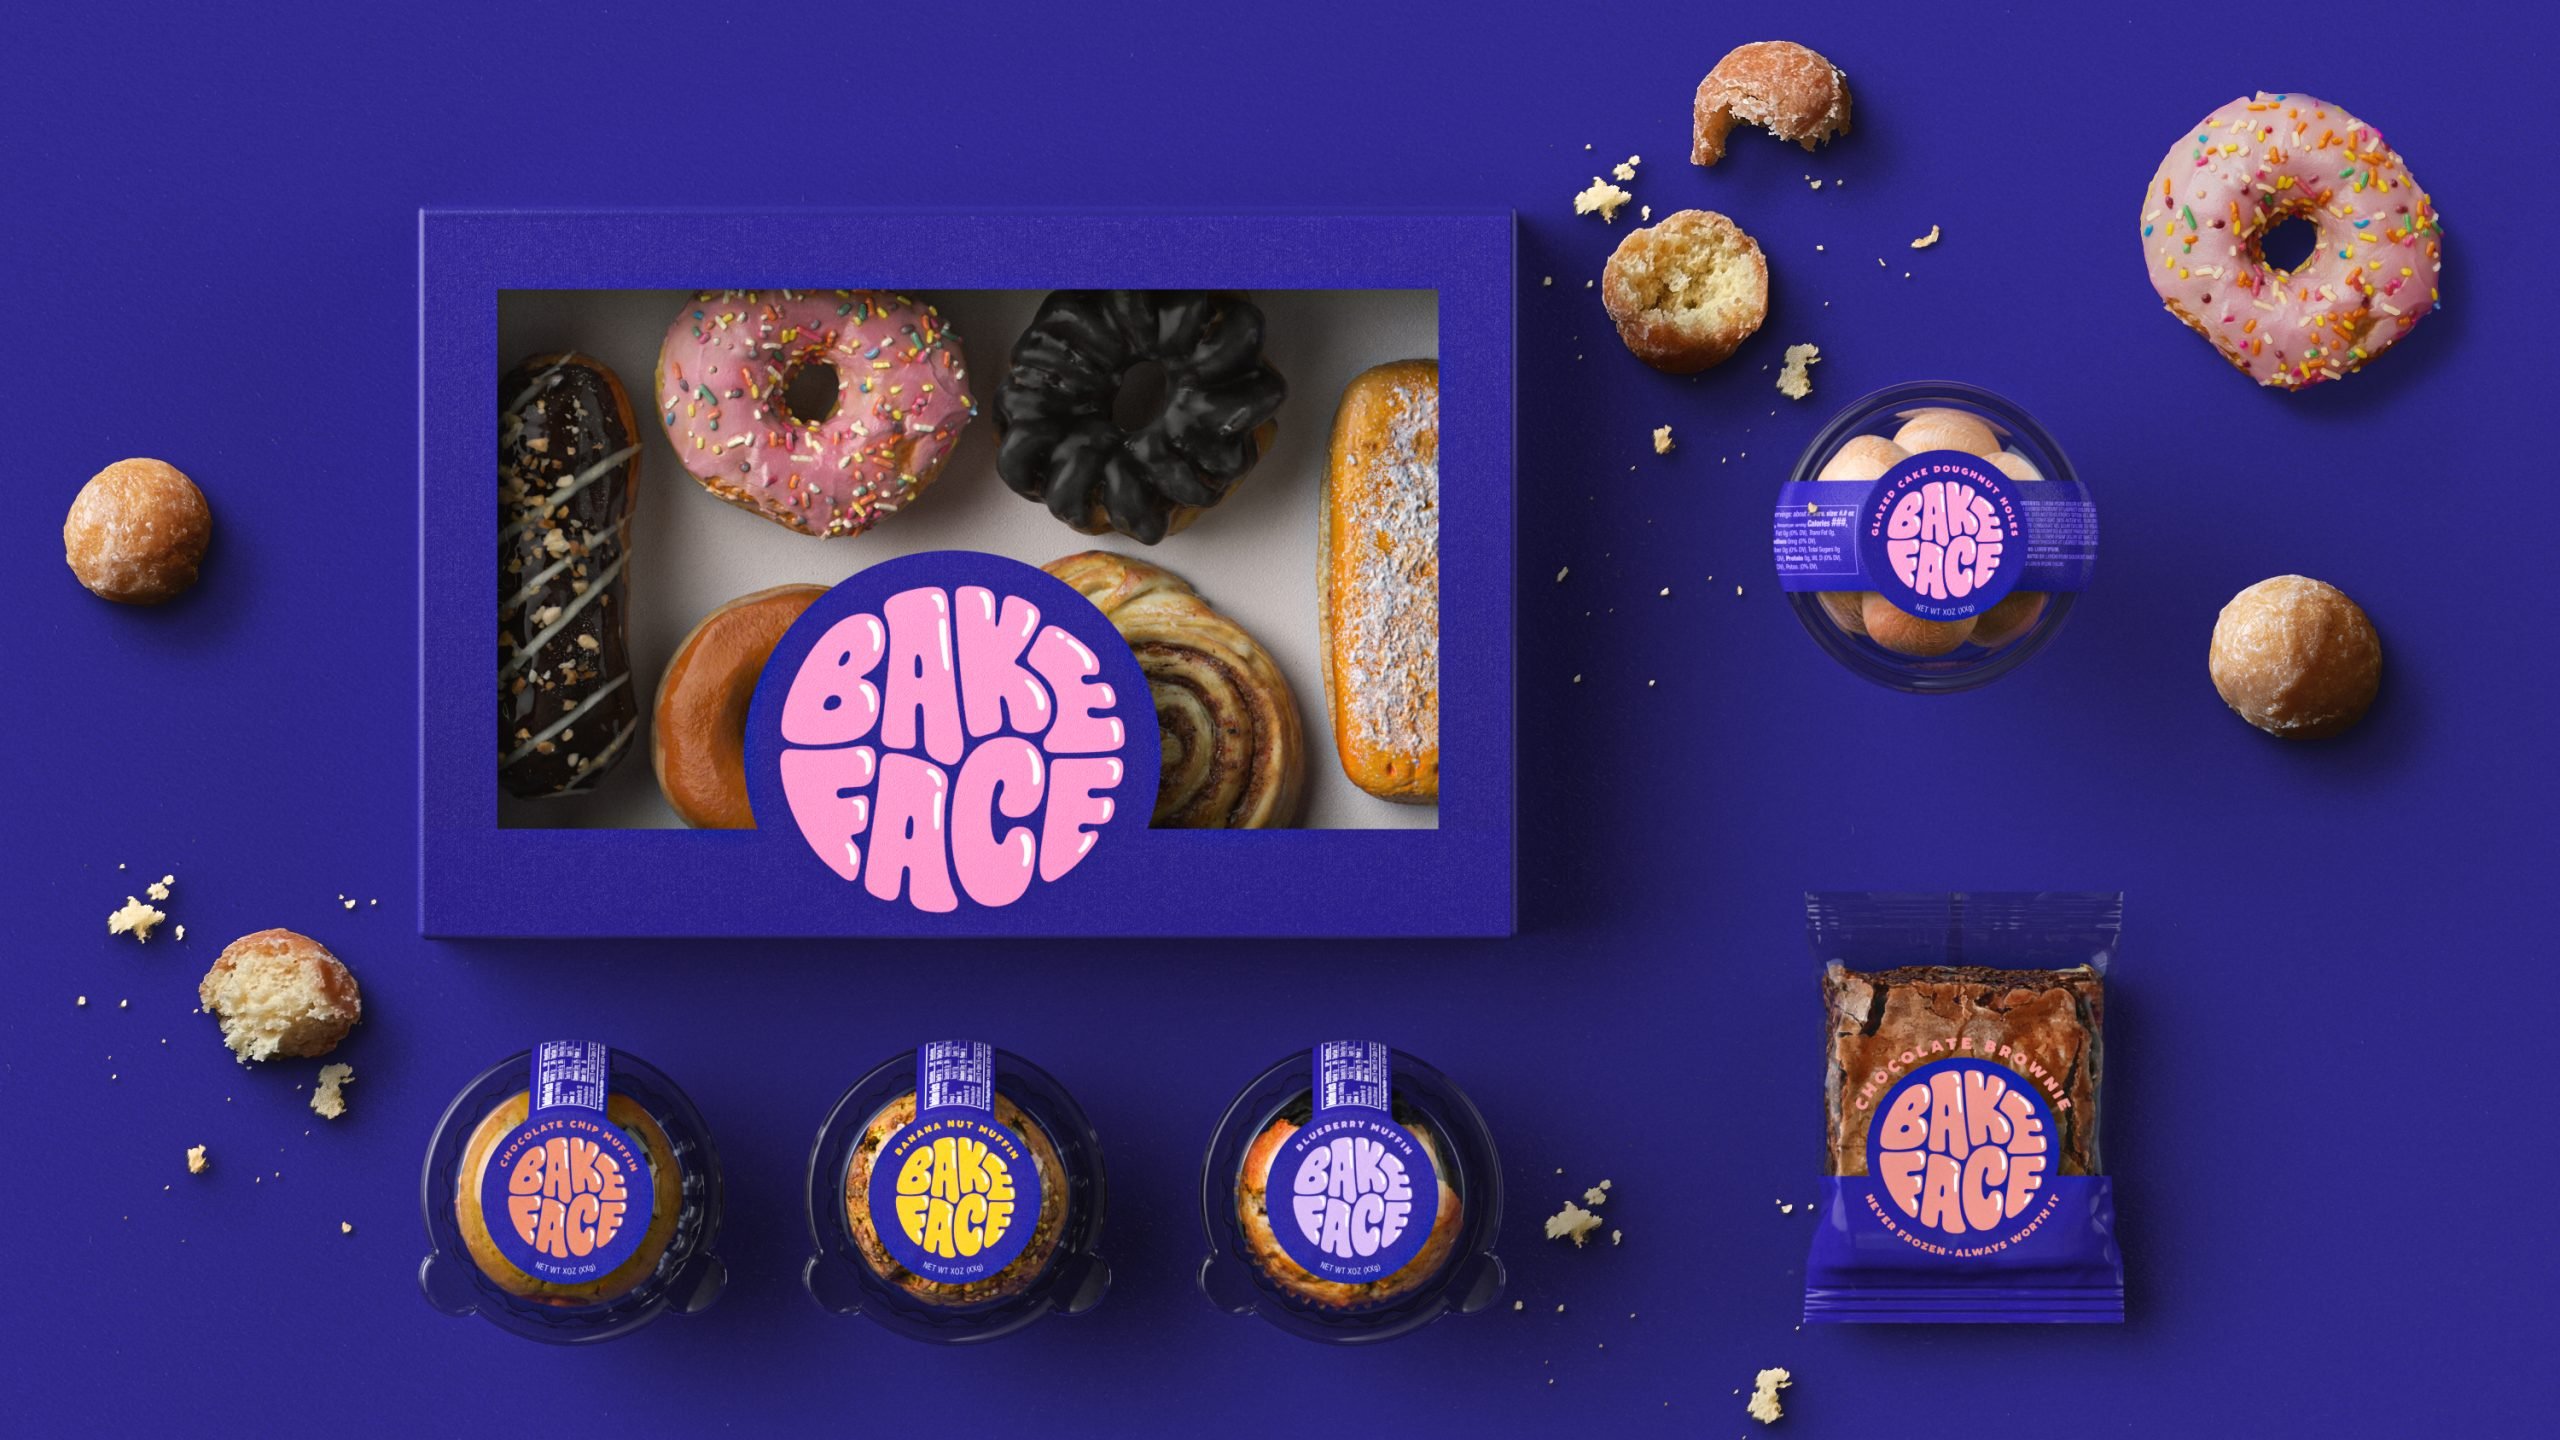 Doughnut Peddler Becomes Bakeface in a Playful Rebrand from Pearlfisher